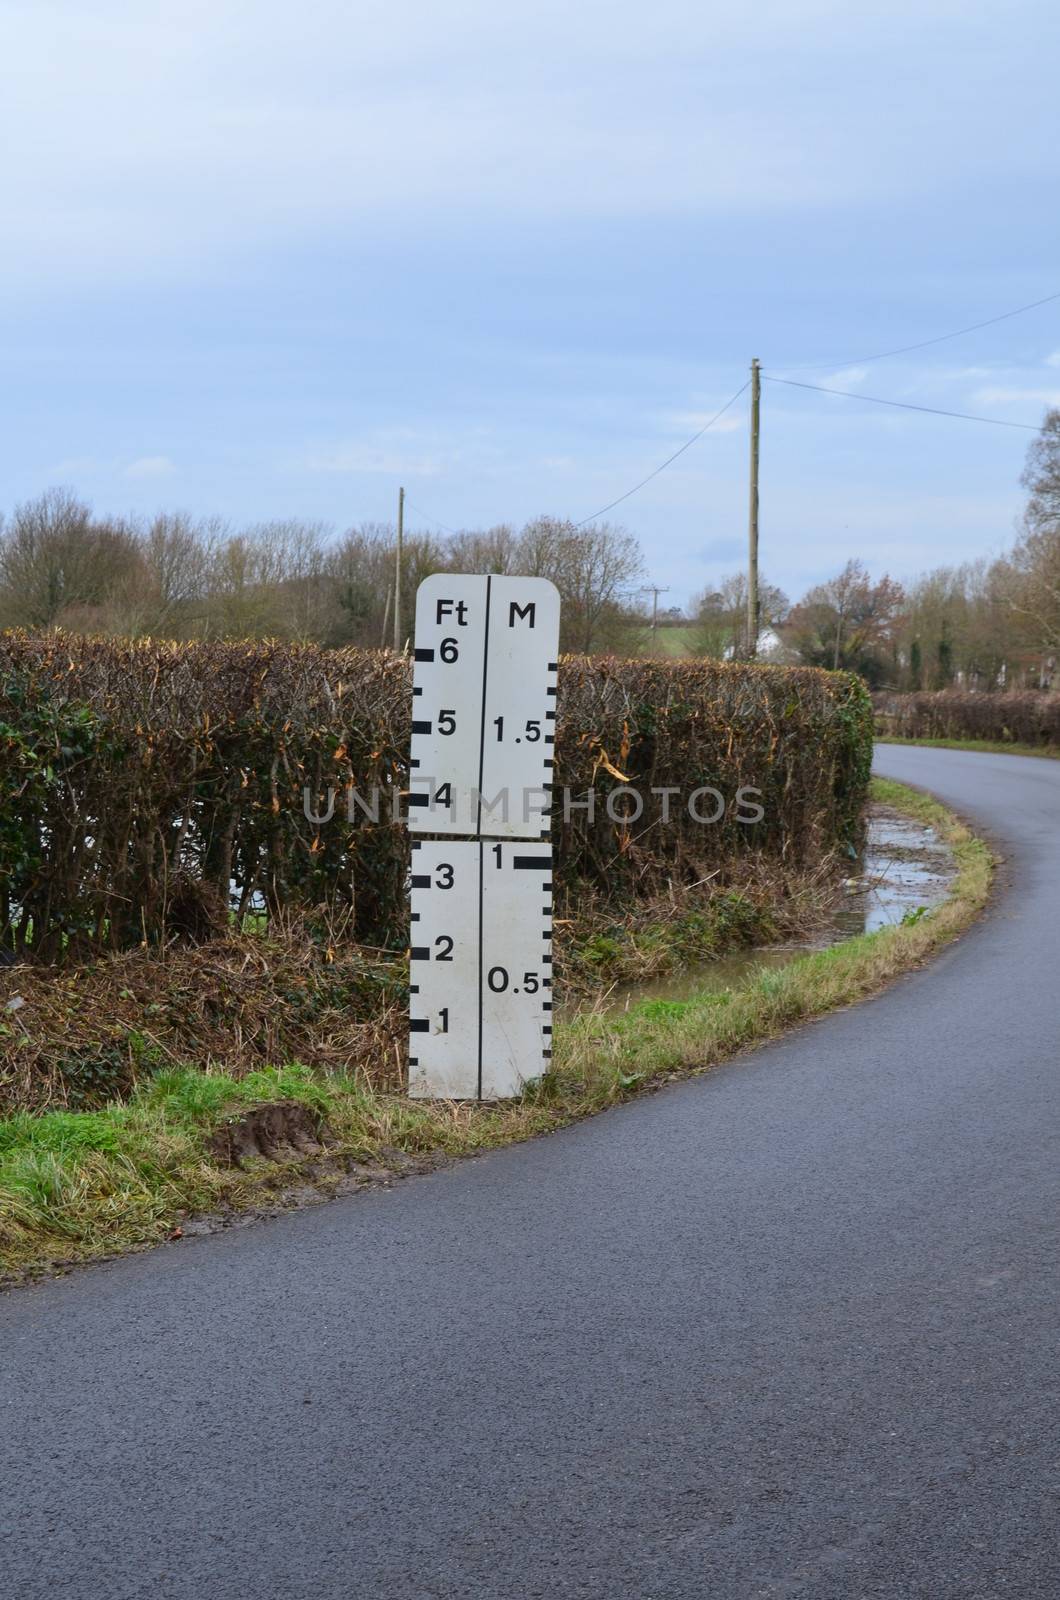 A roadside water level indictor that marks the depth of flood water which rises when the river near bursts its banks.